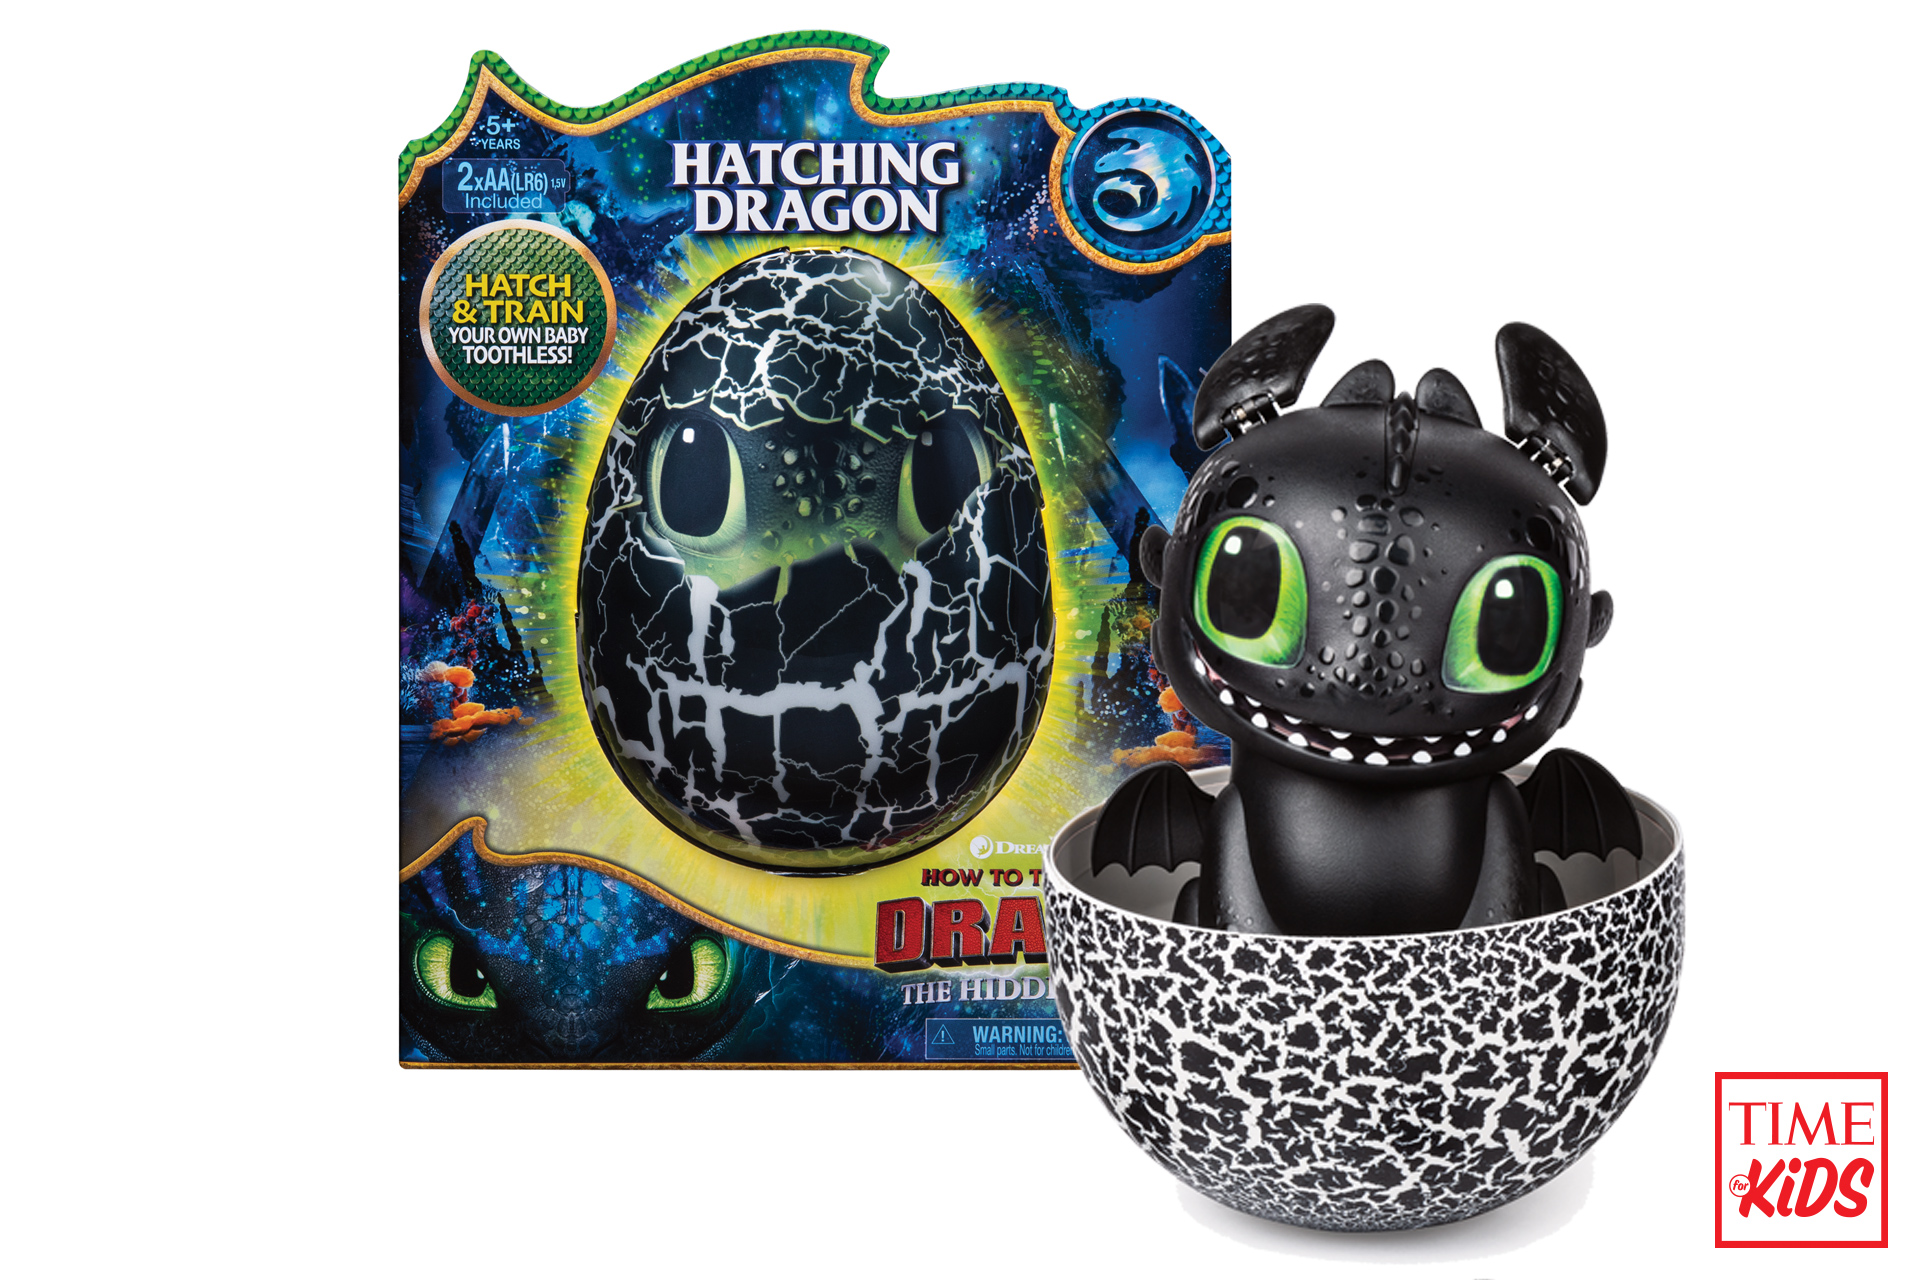 Picture of hatching dragon for toy guide.